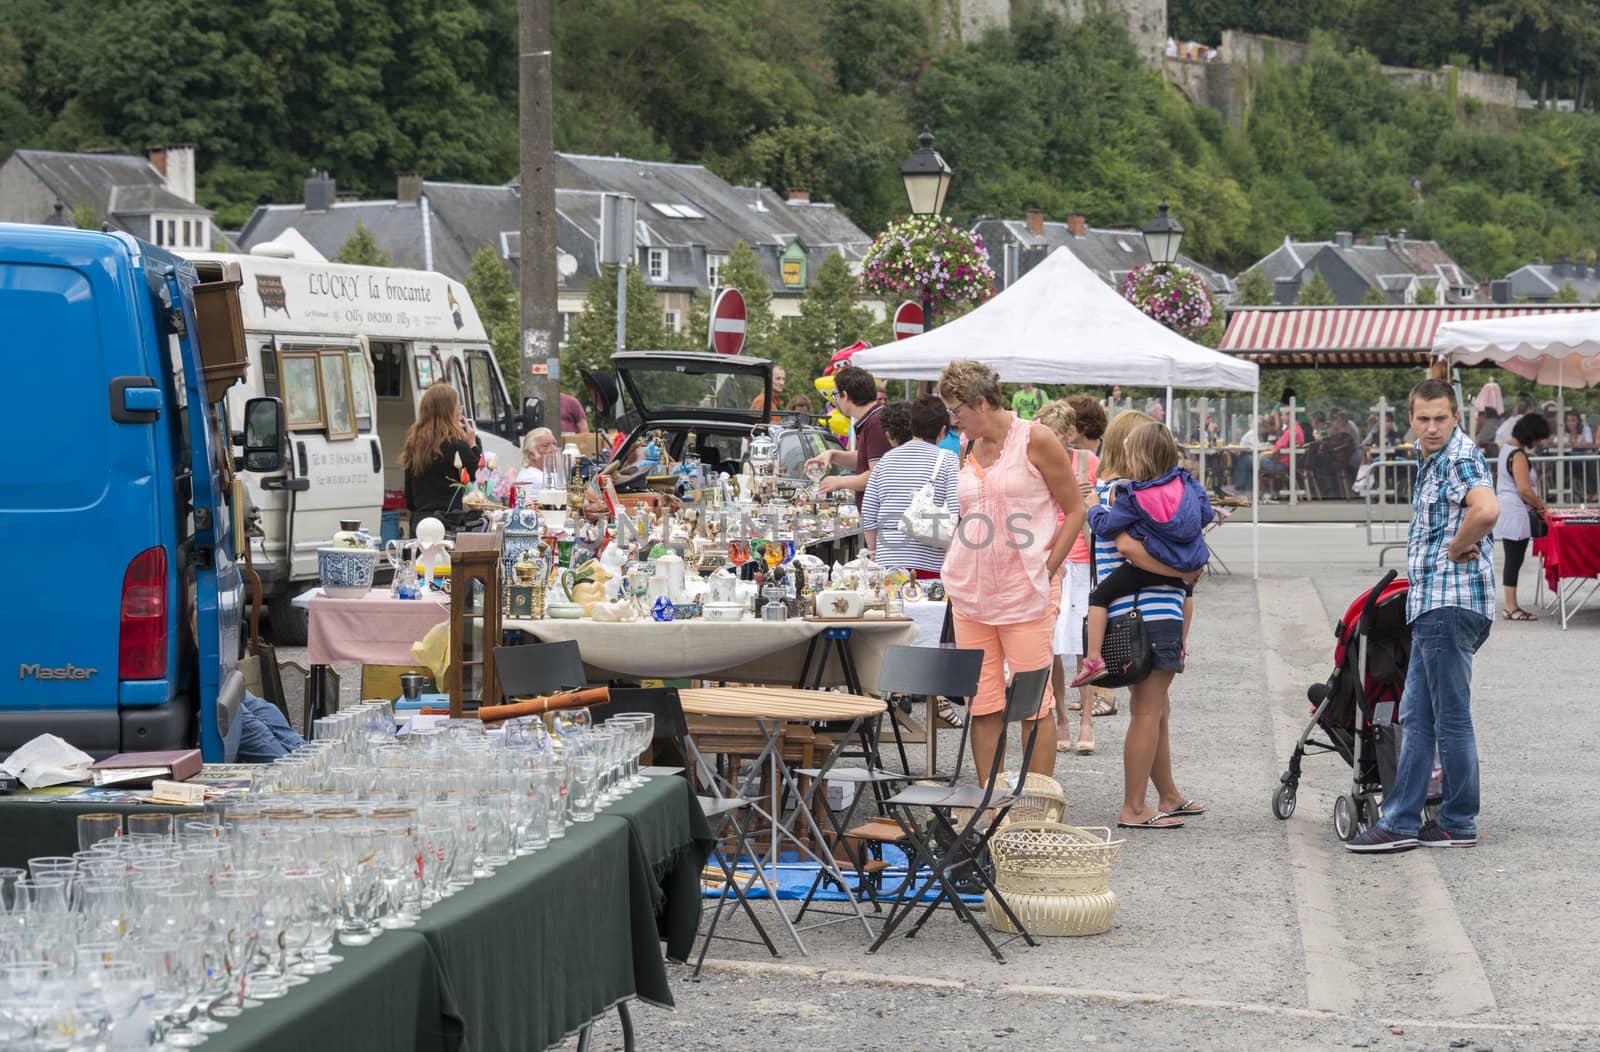 people shopping on the brocante market  by compuinfoto